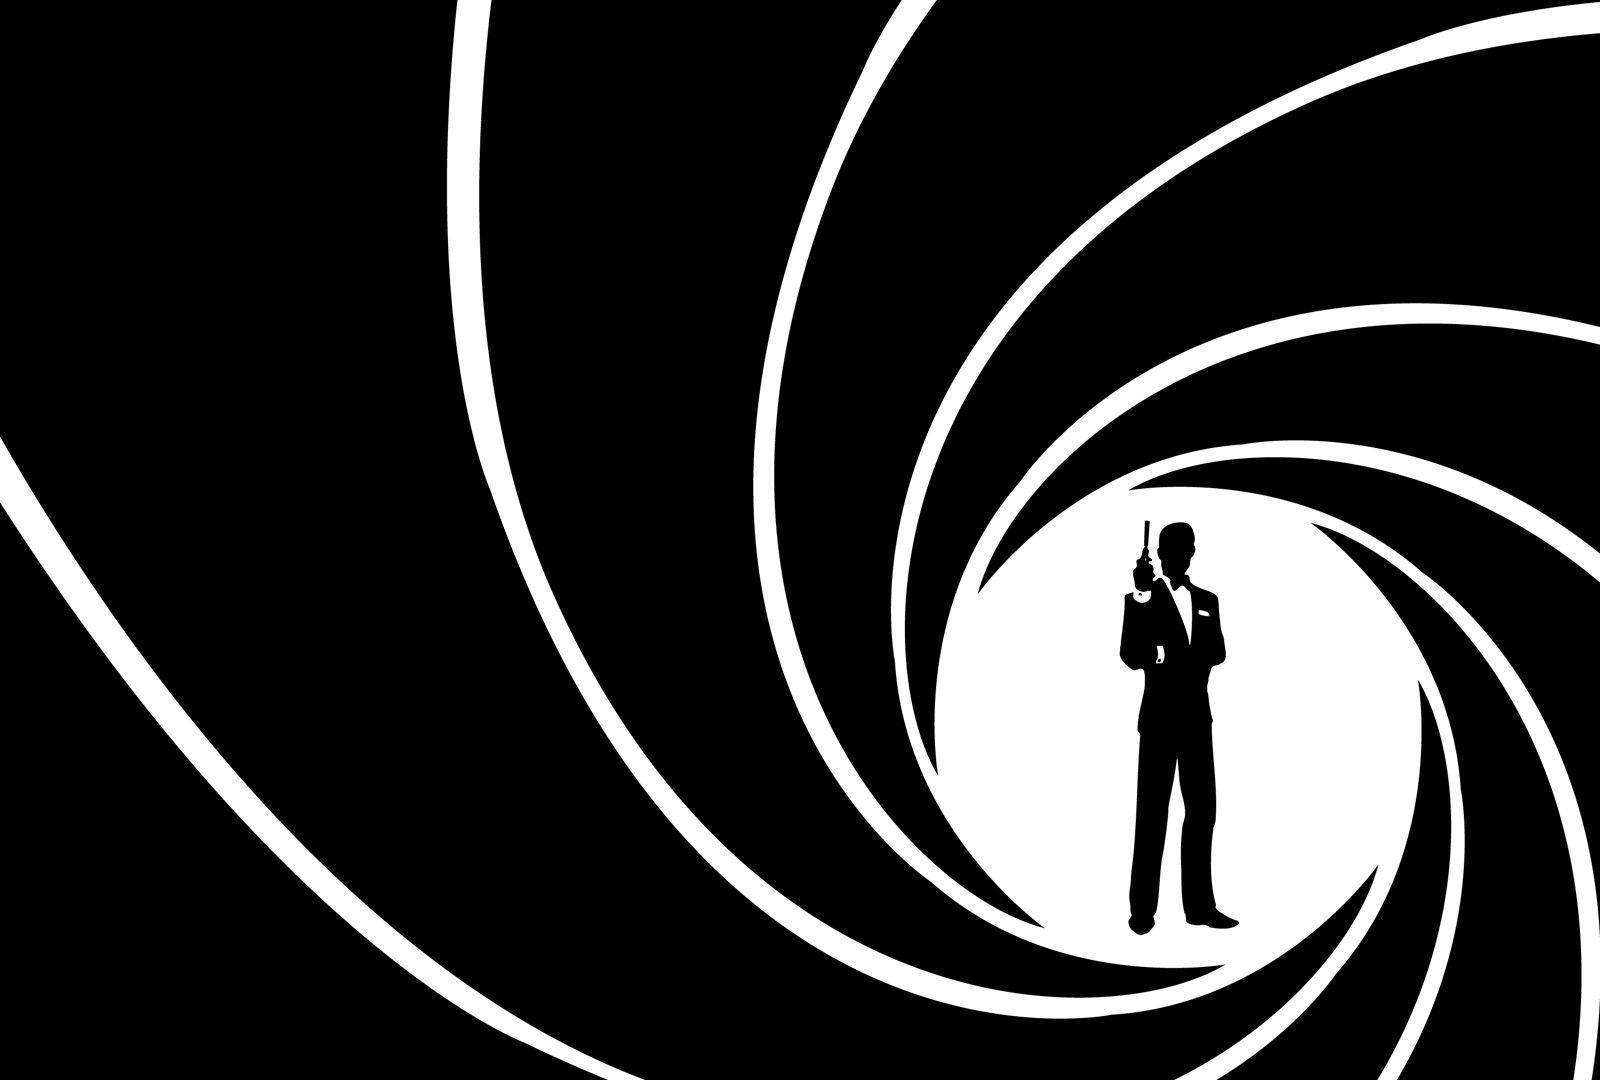 james bond the world is not enough 007 wallpaper. Style Favor